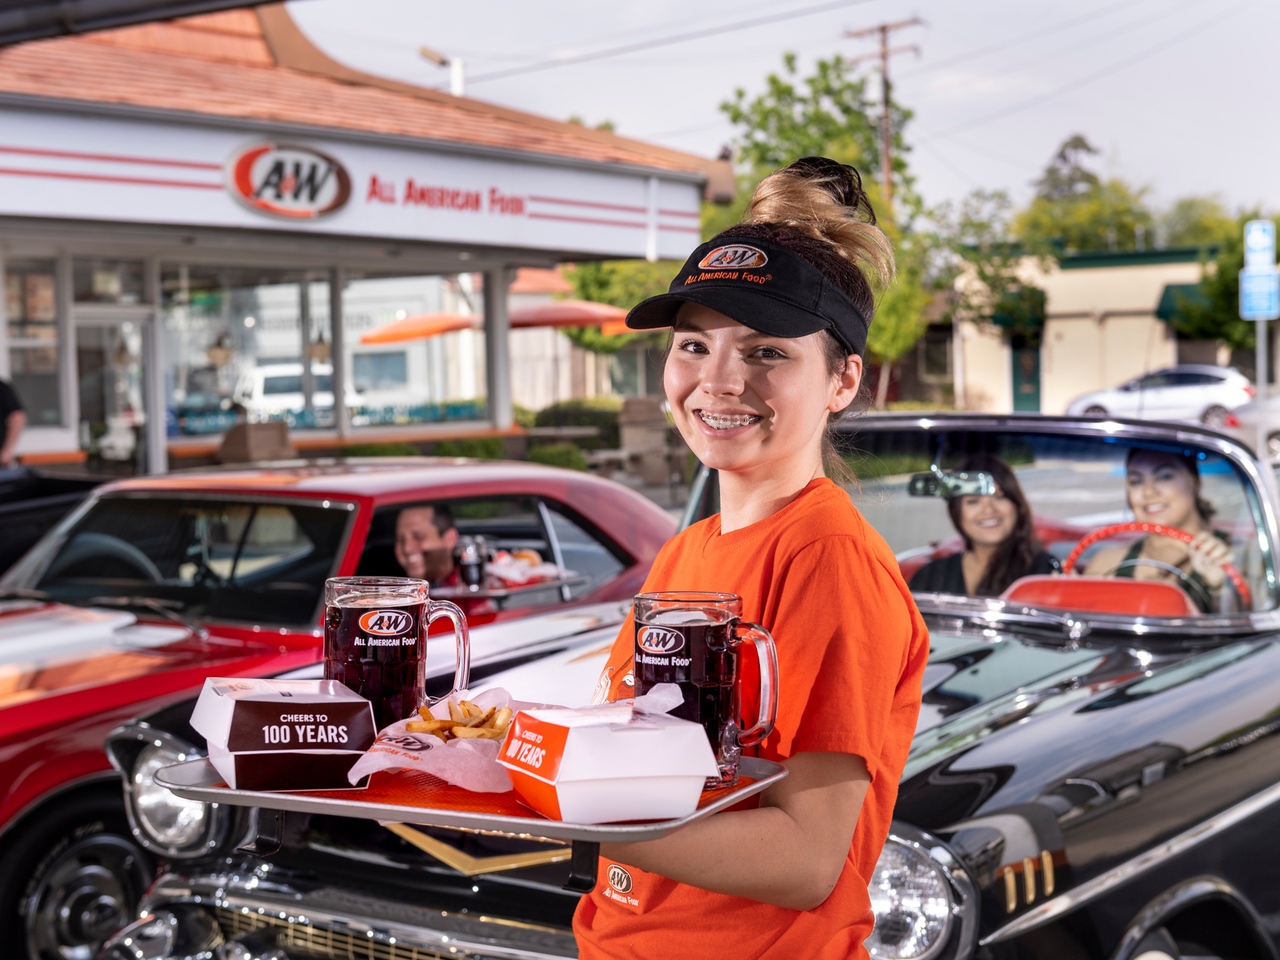 A&W Restaurant team member holding tray of food and mugs of A&W Root Beer.